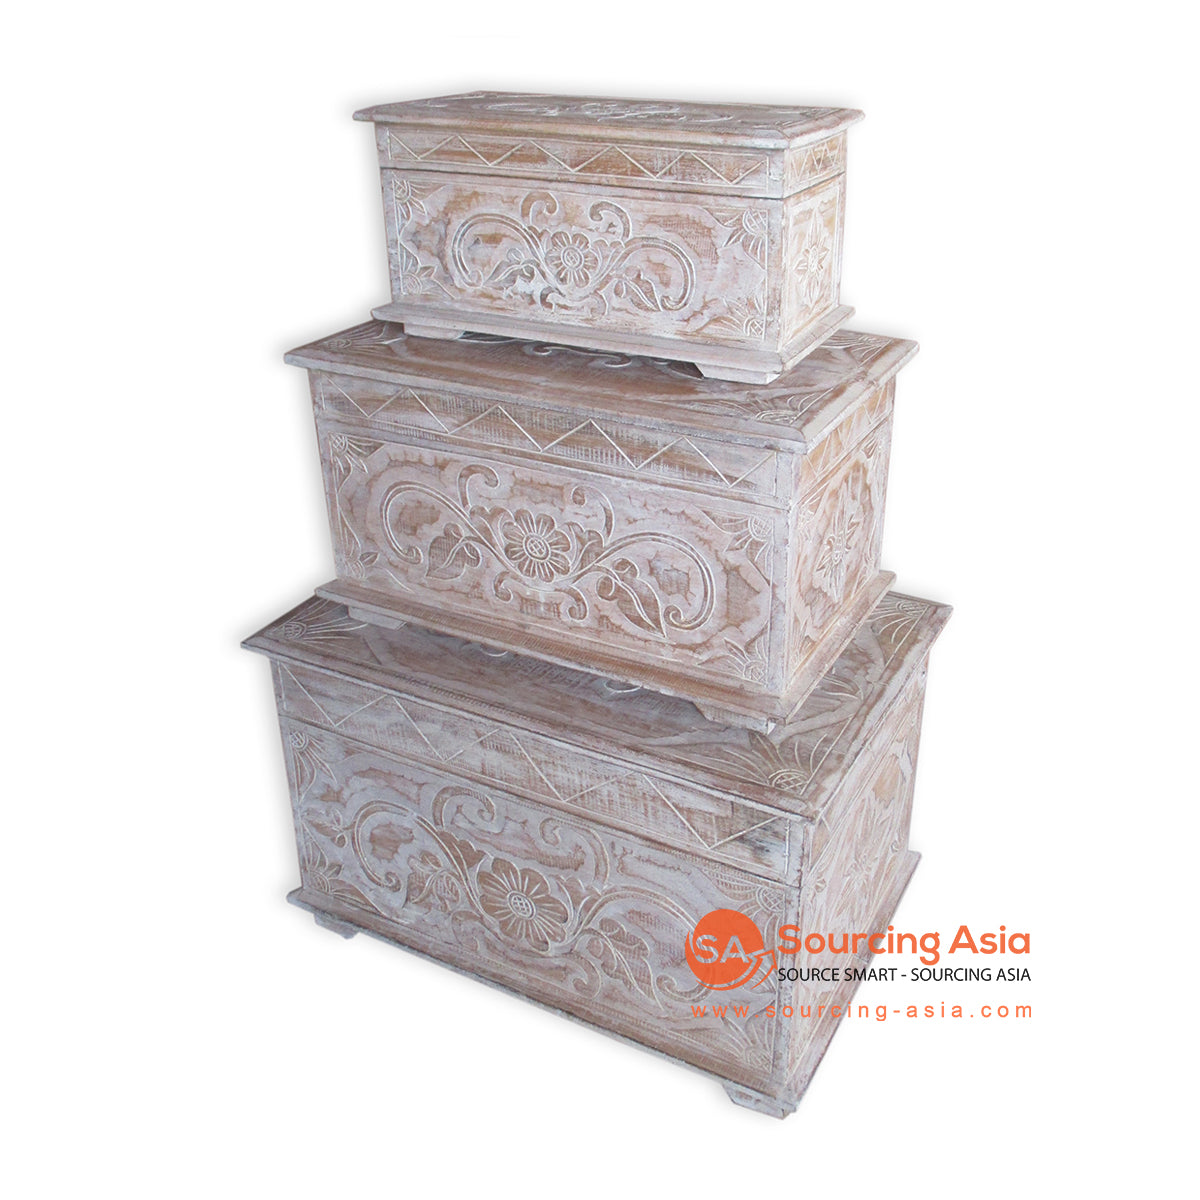 THE145BW SET OF THREE BROWN WASH CARVED WOODEN BOXES